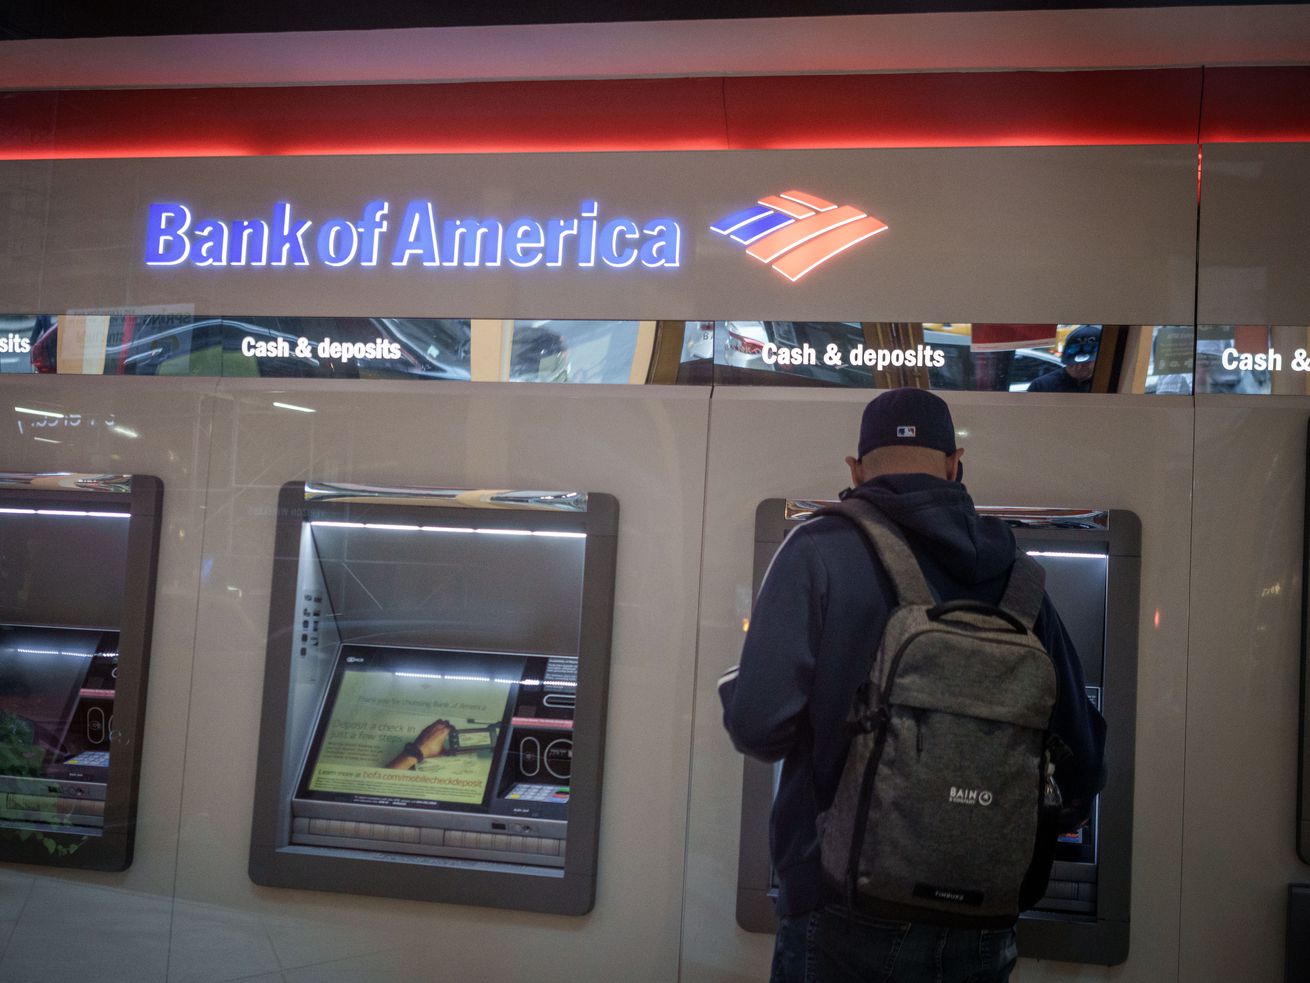 A person carrying a backpack stands at a Bank of America ATM.